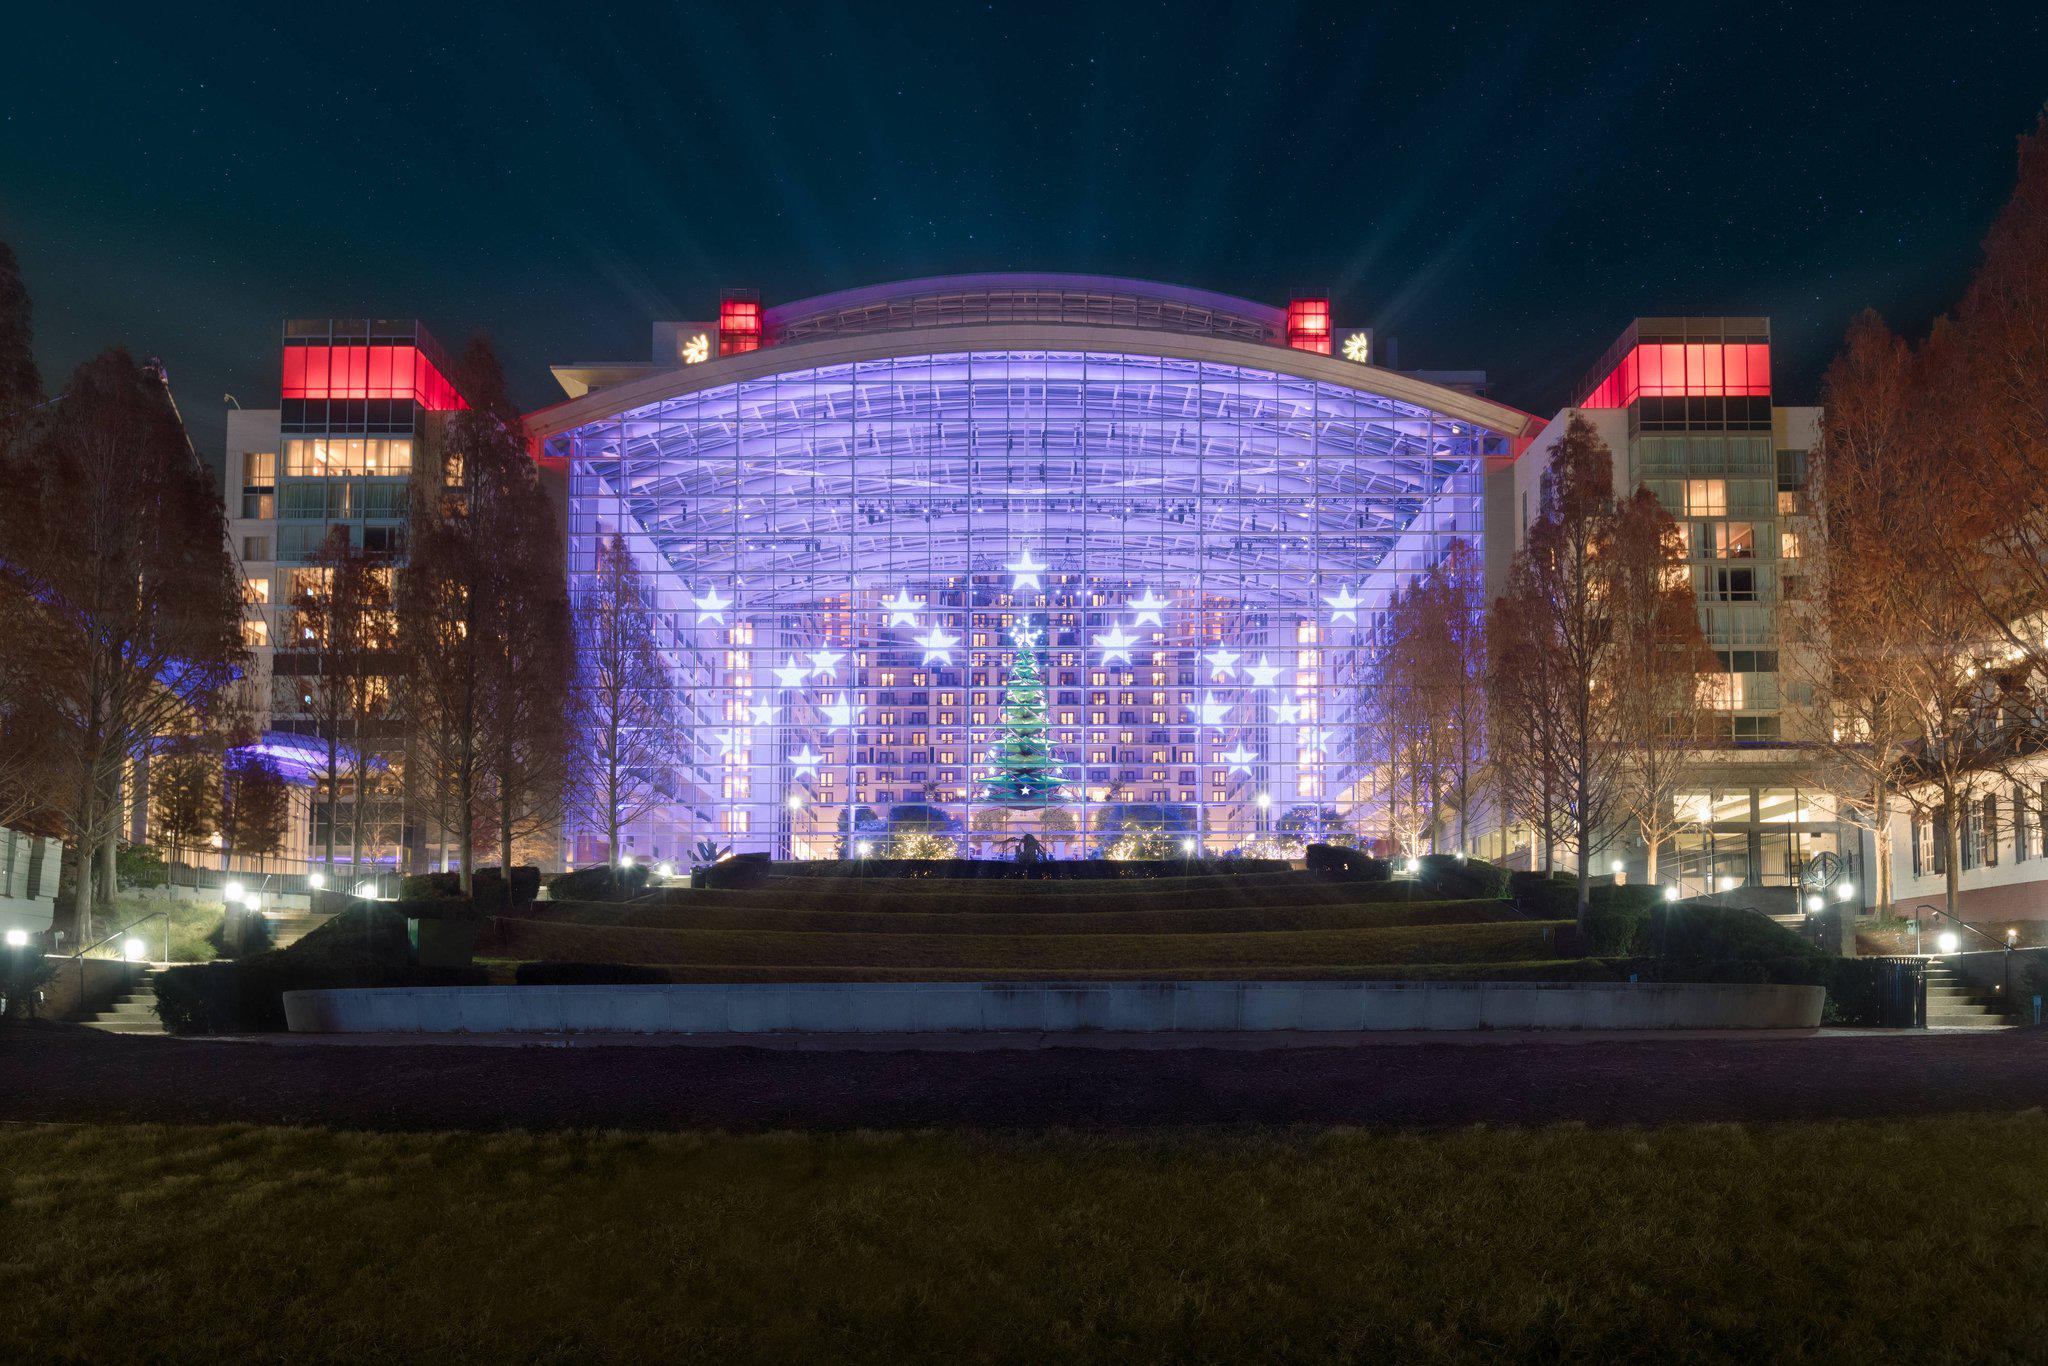 Gaylord National Resort & Convention Center Photo